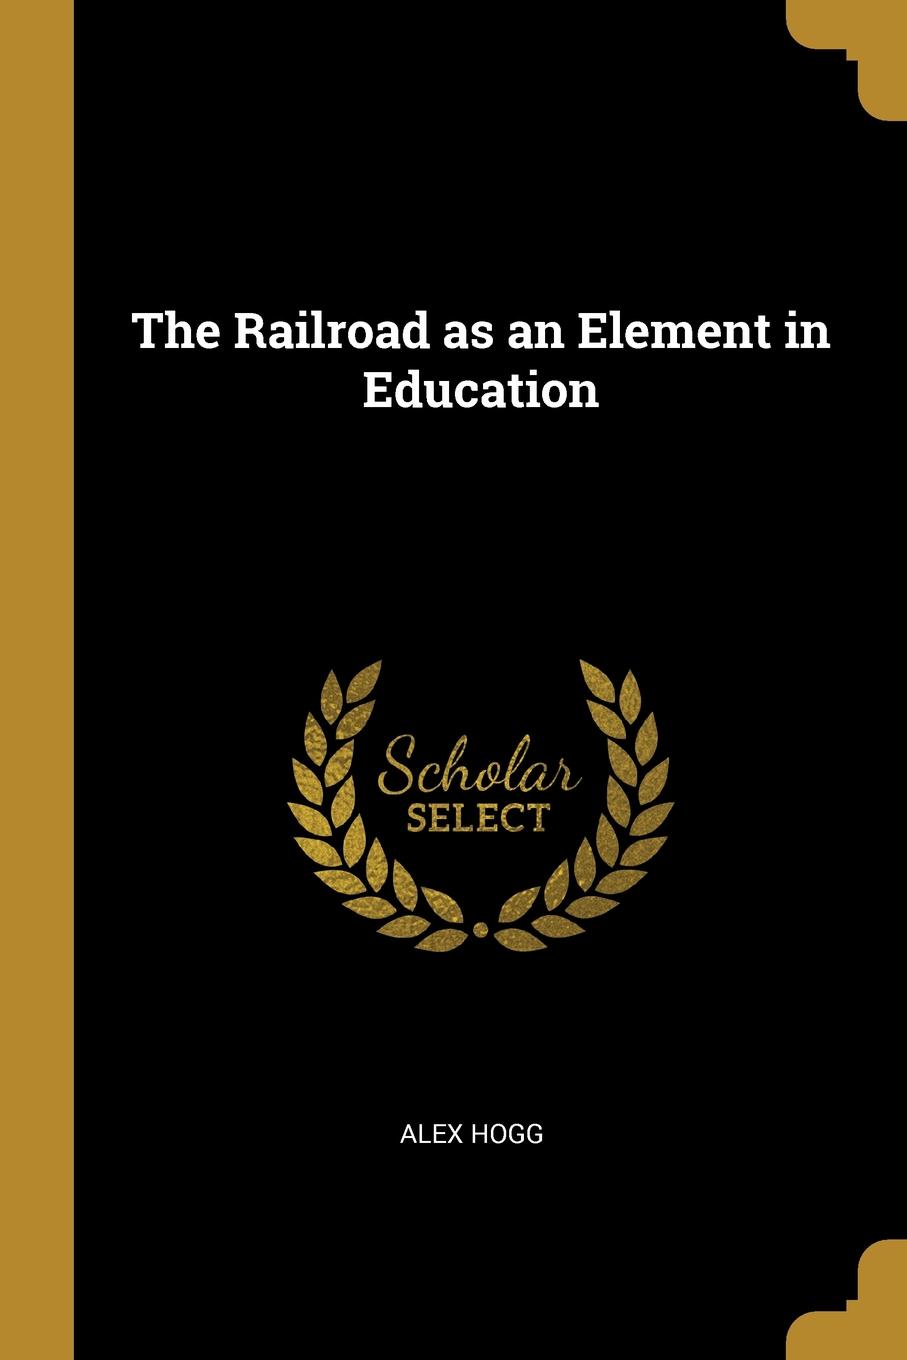 The Railroad as an Element in Education